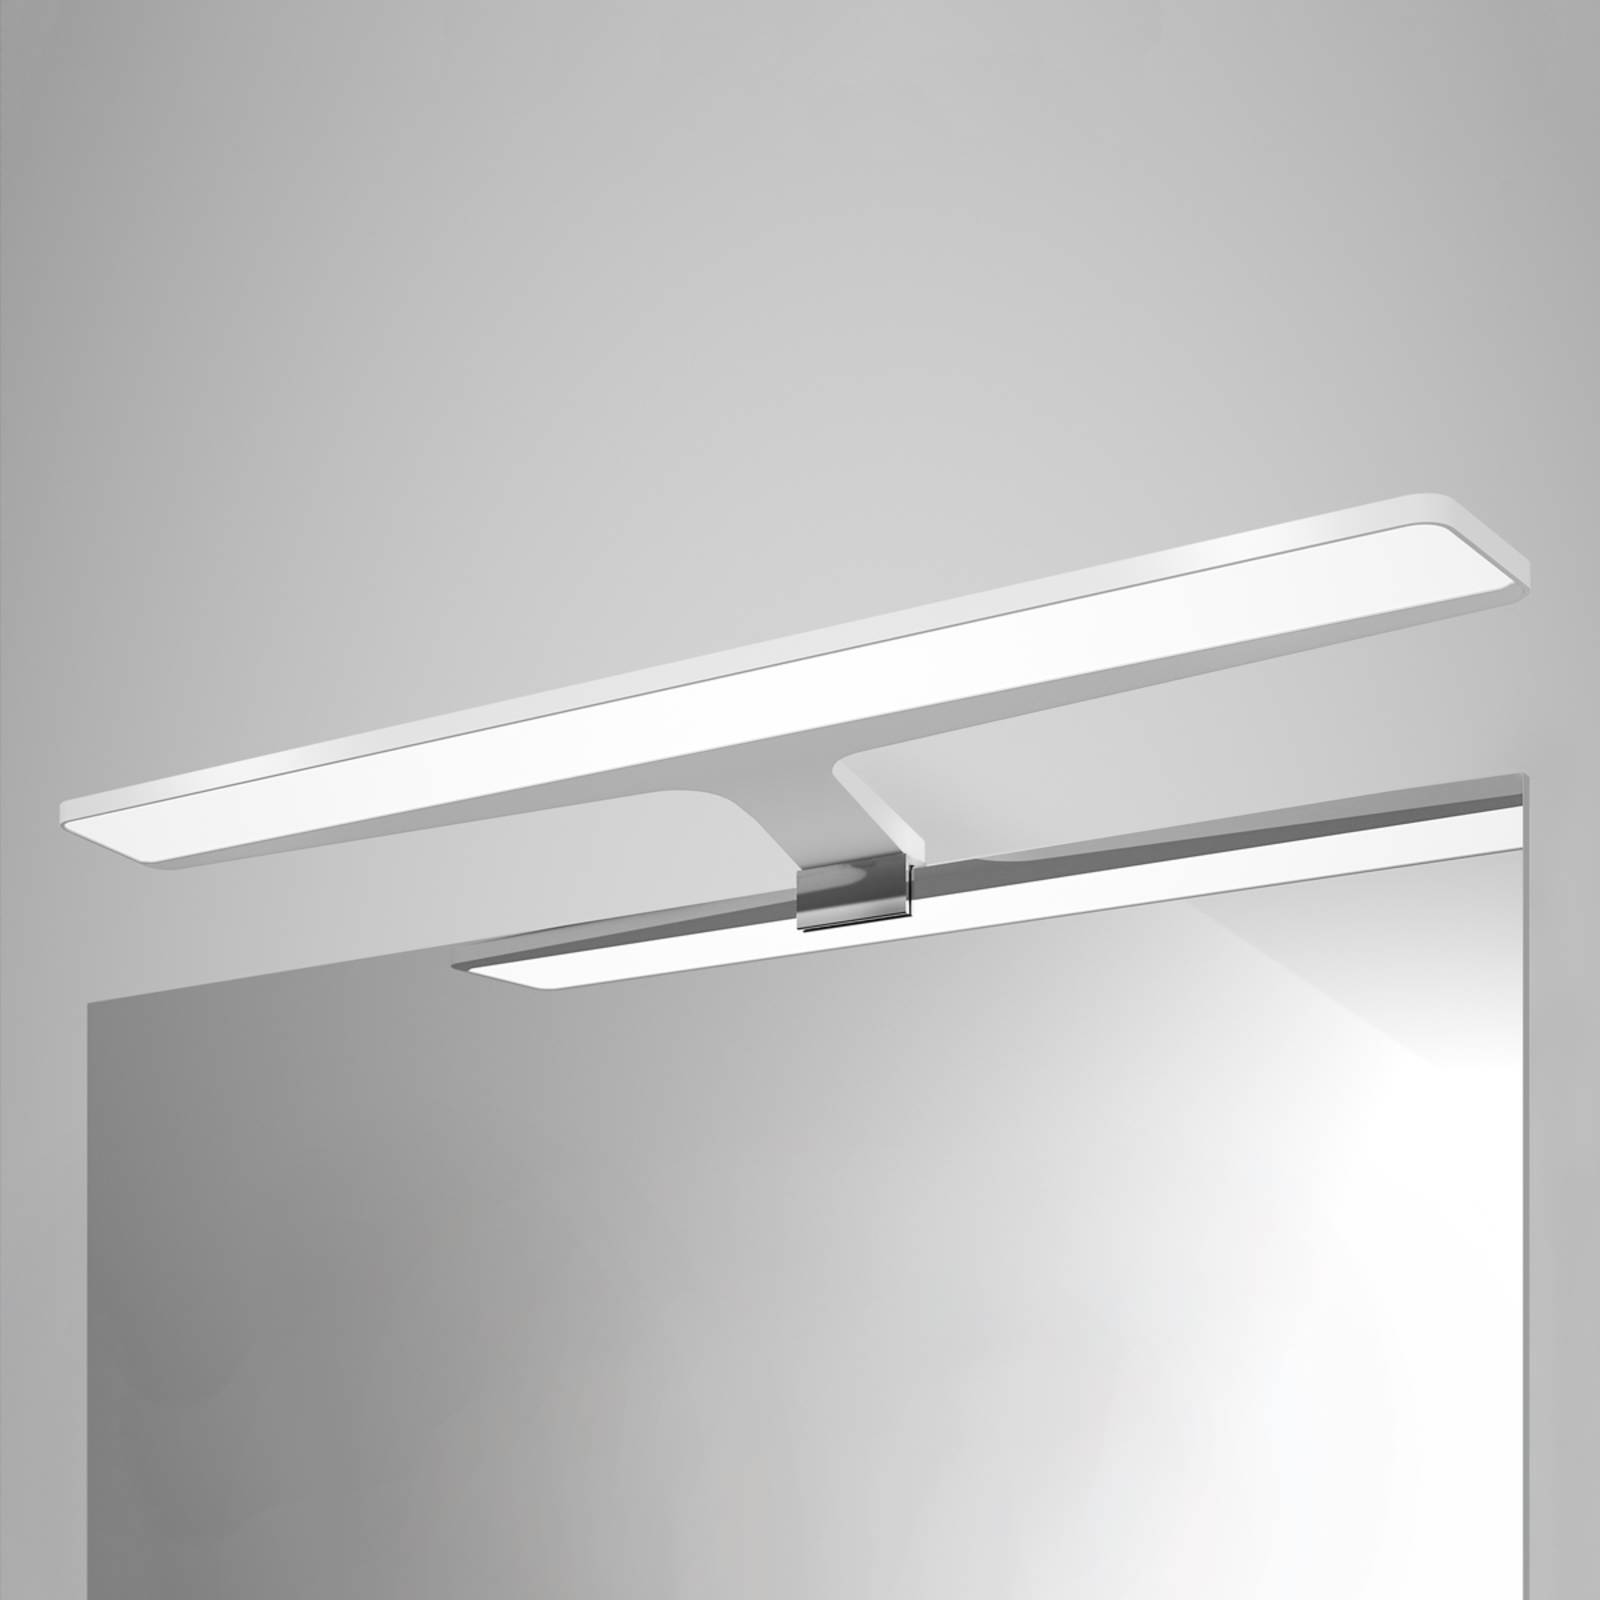 Image of Applique pour miroir LED blanche Nayra 8435324901634